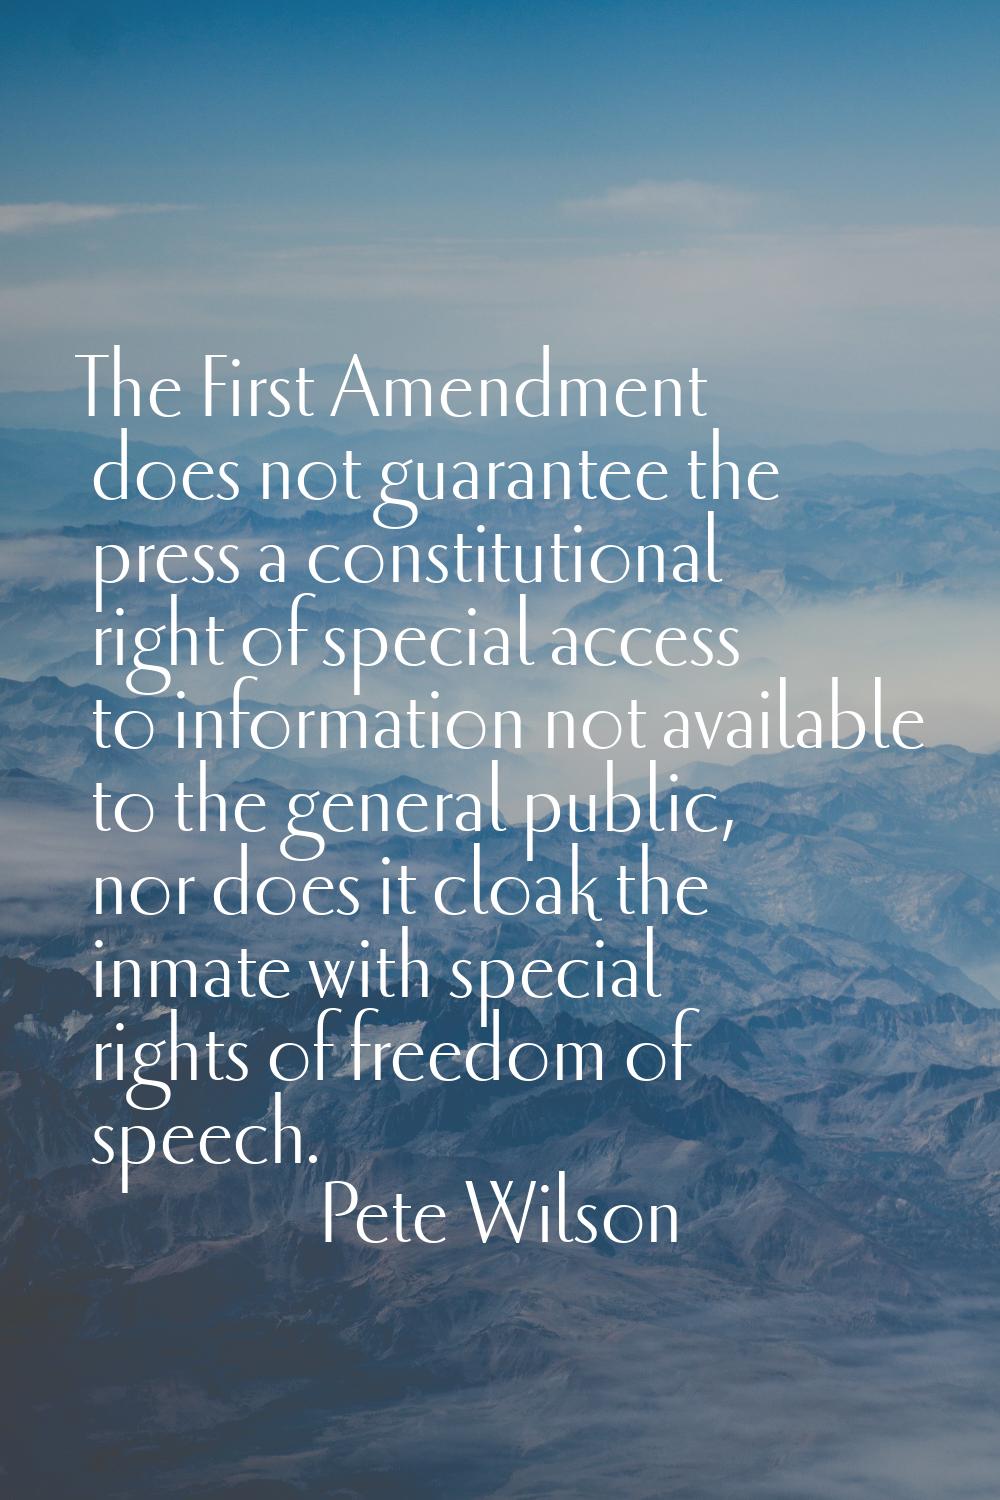 The First Amendment does not guarantee the press a constitutional right of special access to inform